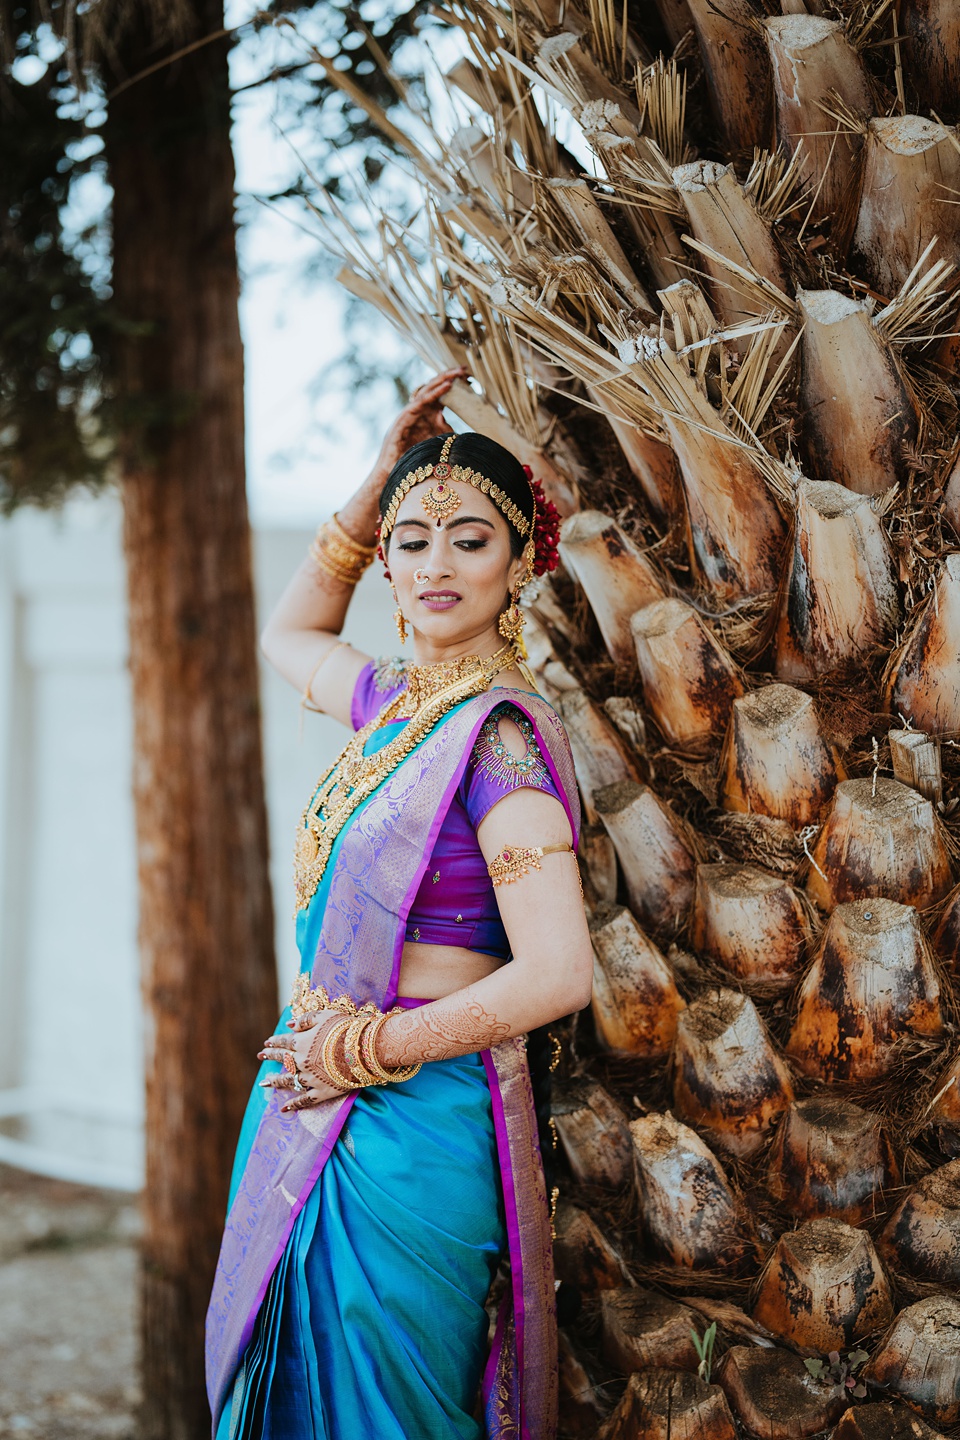 South Indian Bridal Pose - A woman's best jewellery is her shyness.  #cuteness #shyness #brideshyness #portraitphotography #candidshot  #candidmoment #southindianbride #jewelry #bridetobe #canonphotography  #weddingvibes #bangalore #southindianbridalpose ...